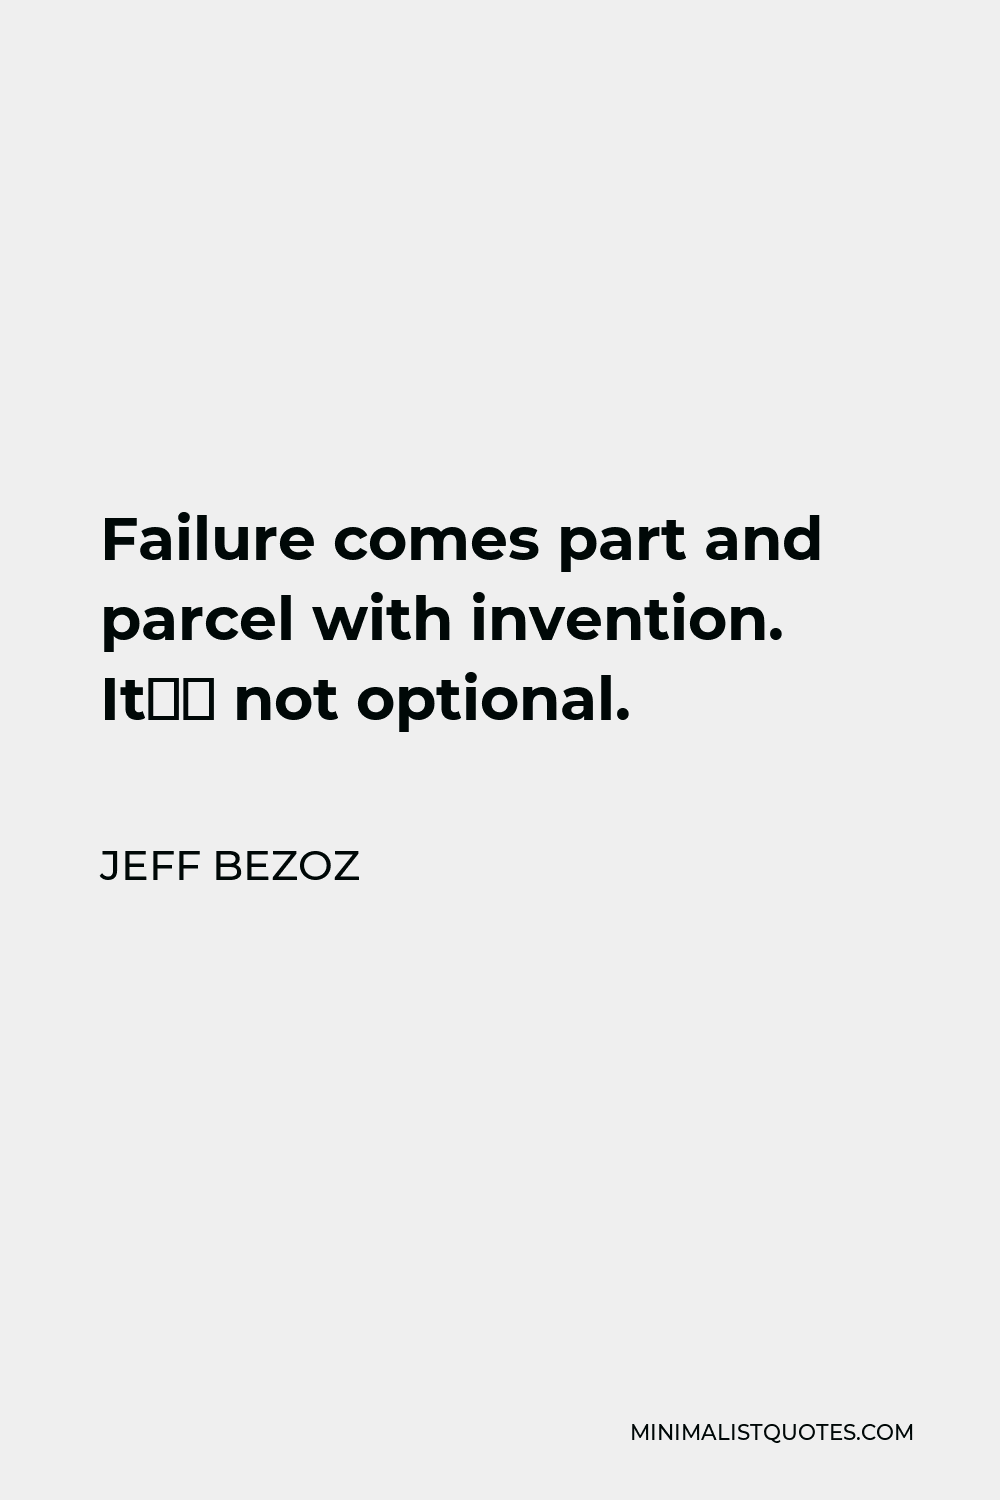 Jeff Bezoz Quote - Failure comes part and parcel with invention. It’s not optional.